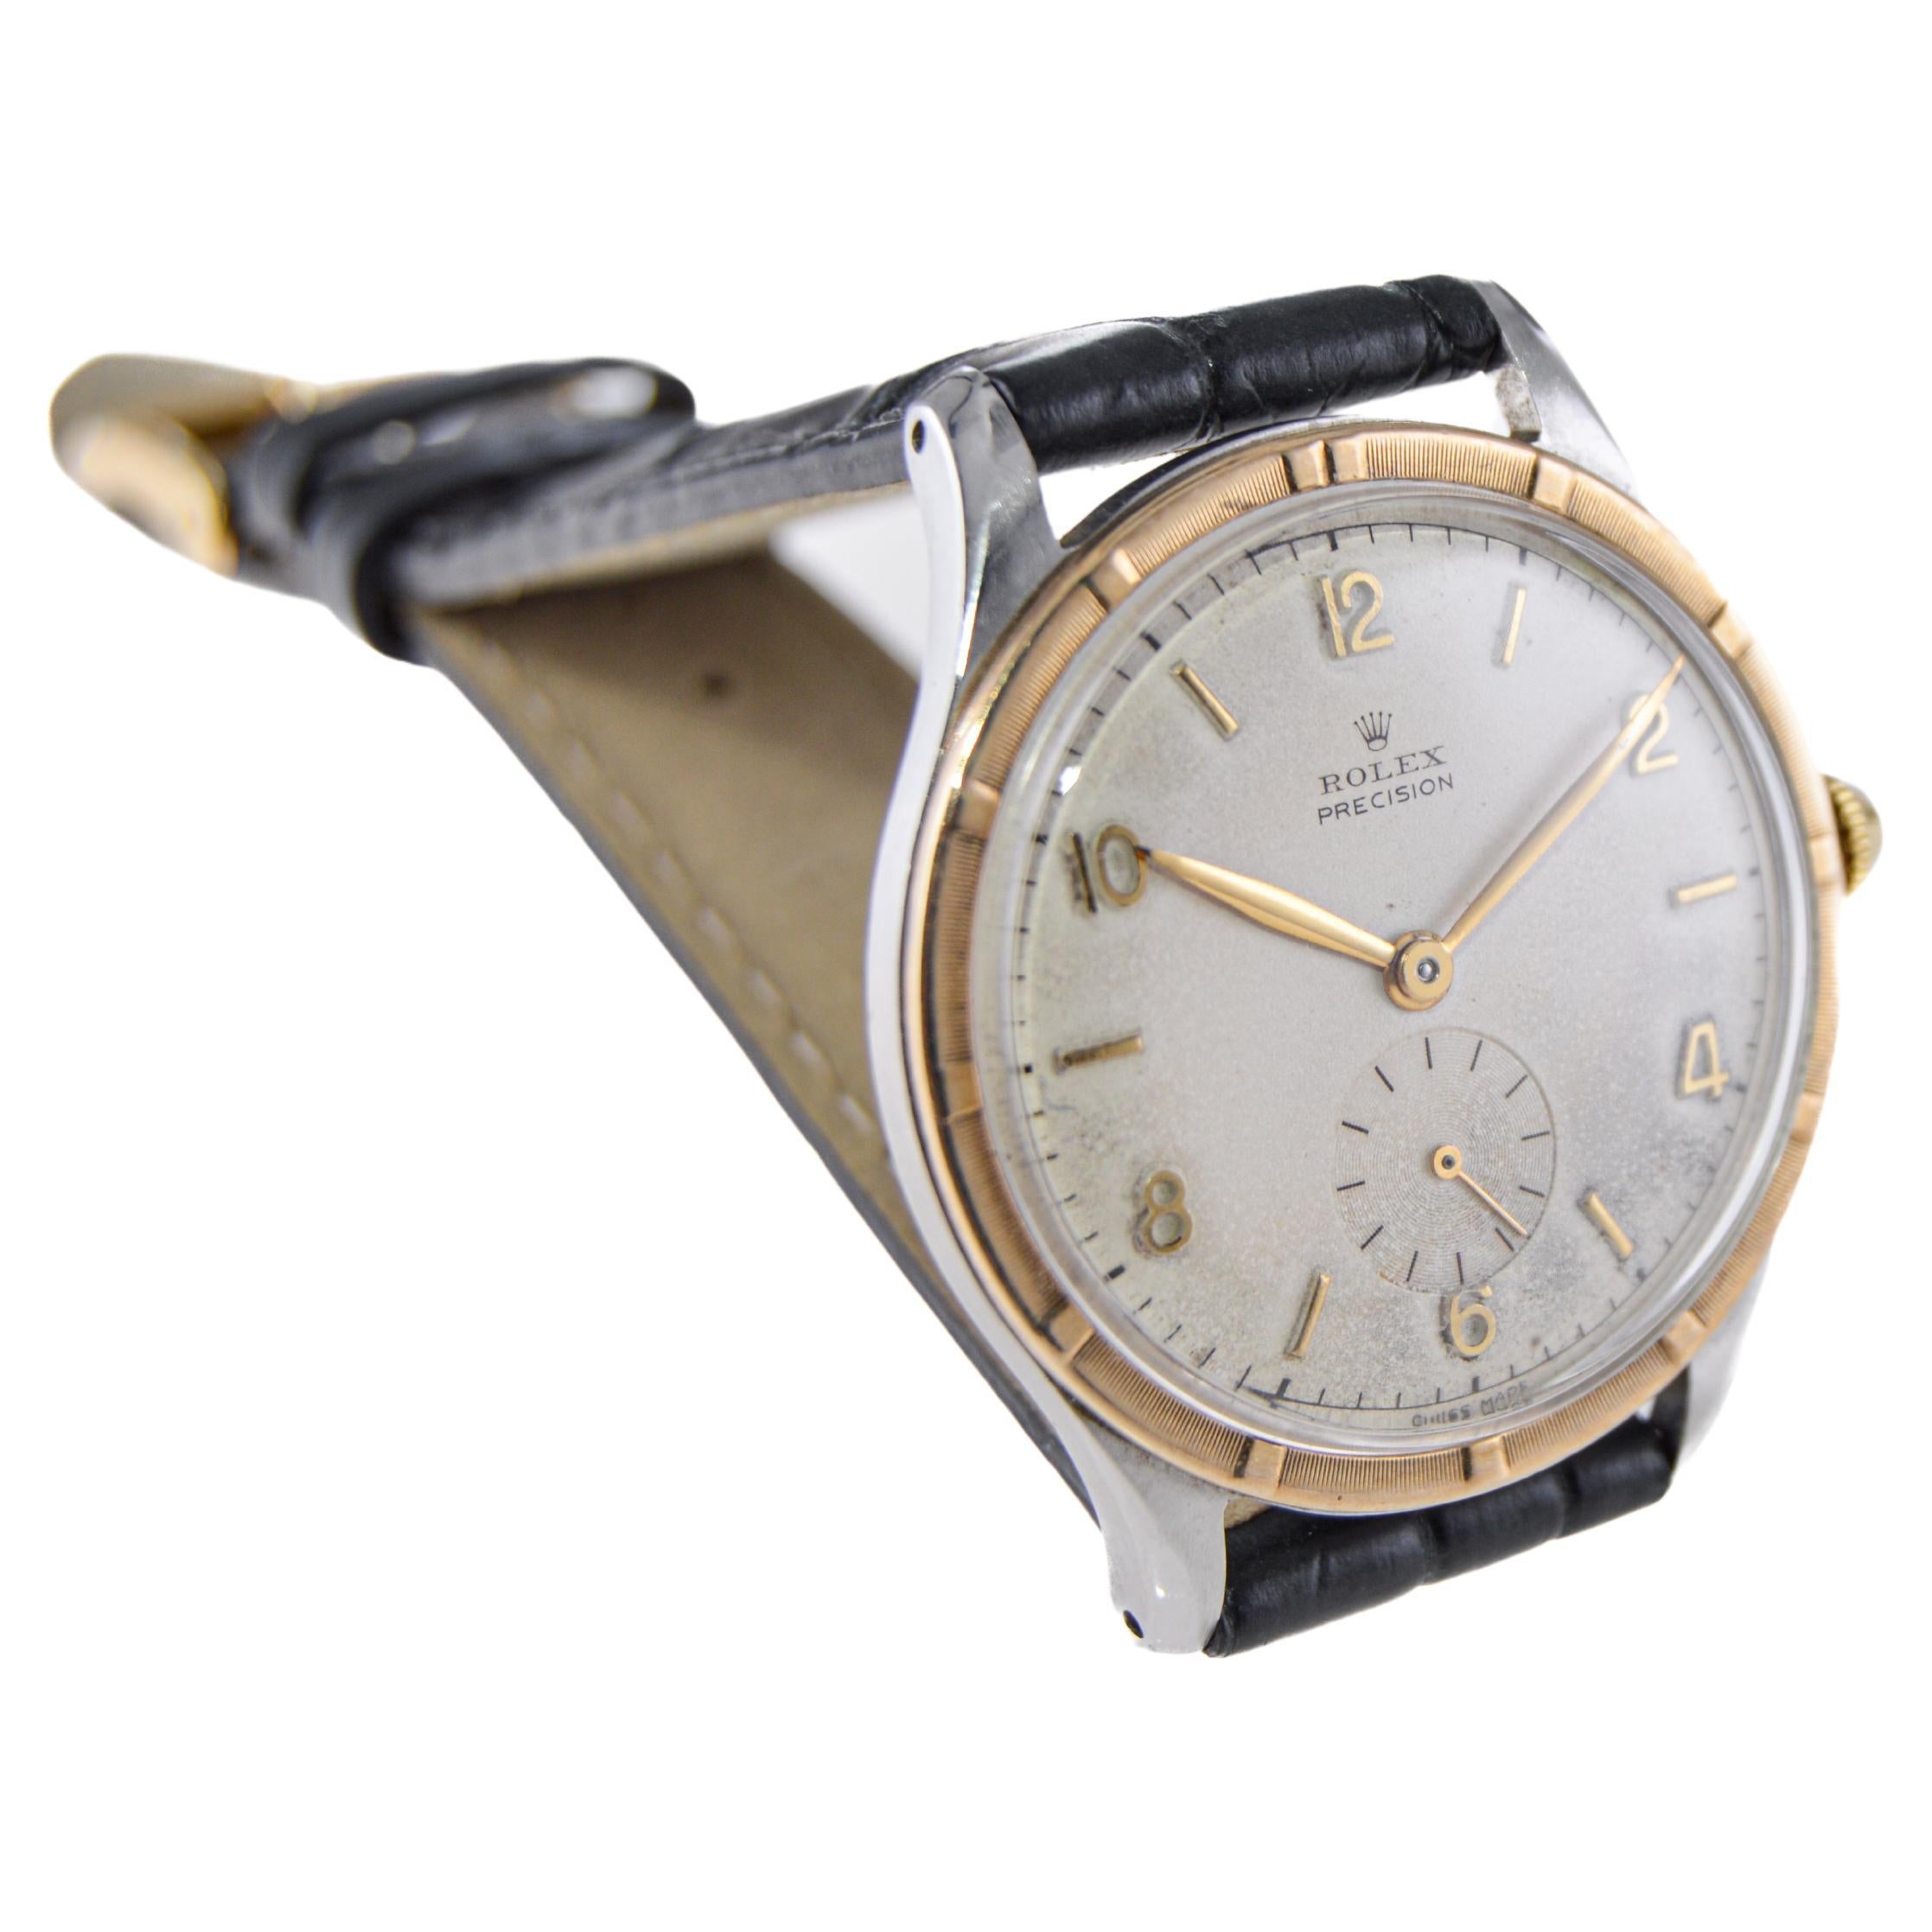 Art Deco Rolex Stainless Steel and Gold Precision With Patinated Original Dial from 1953 For Sale